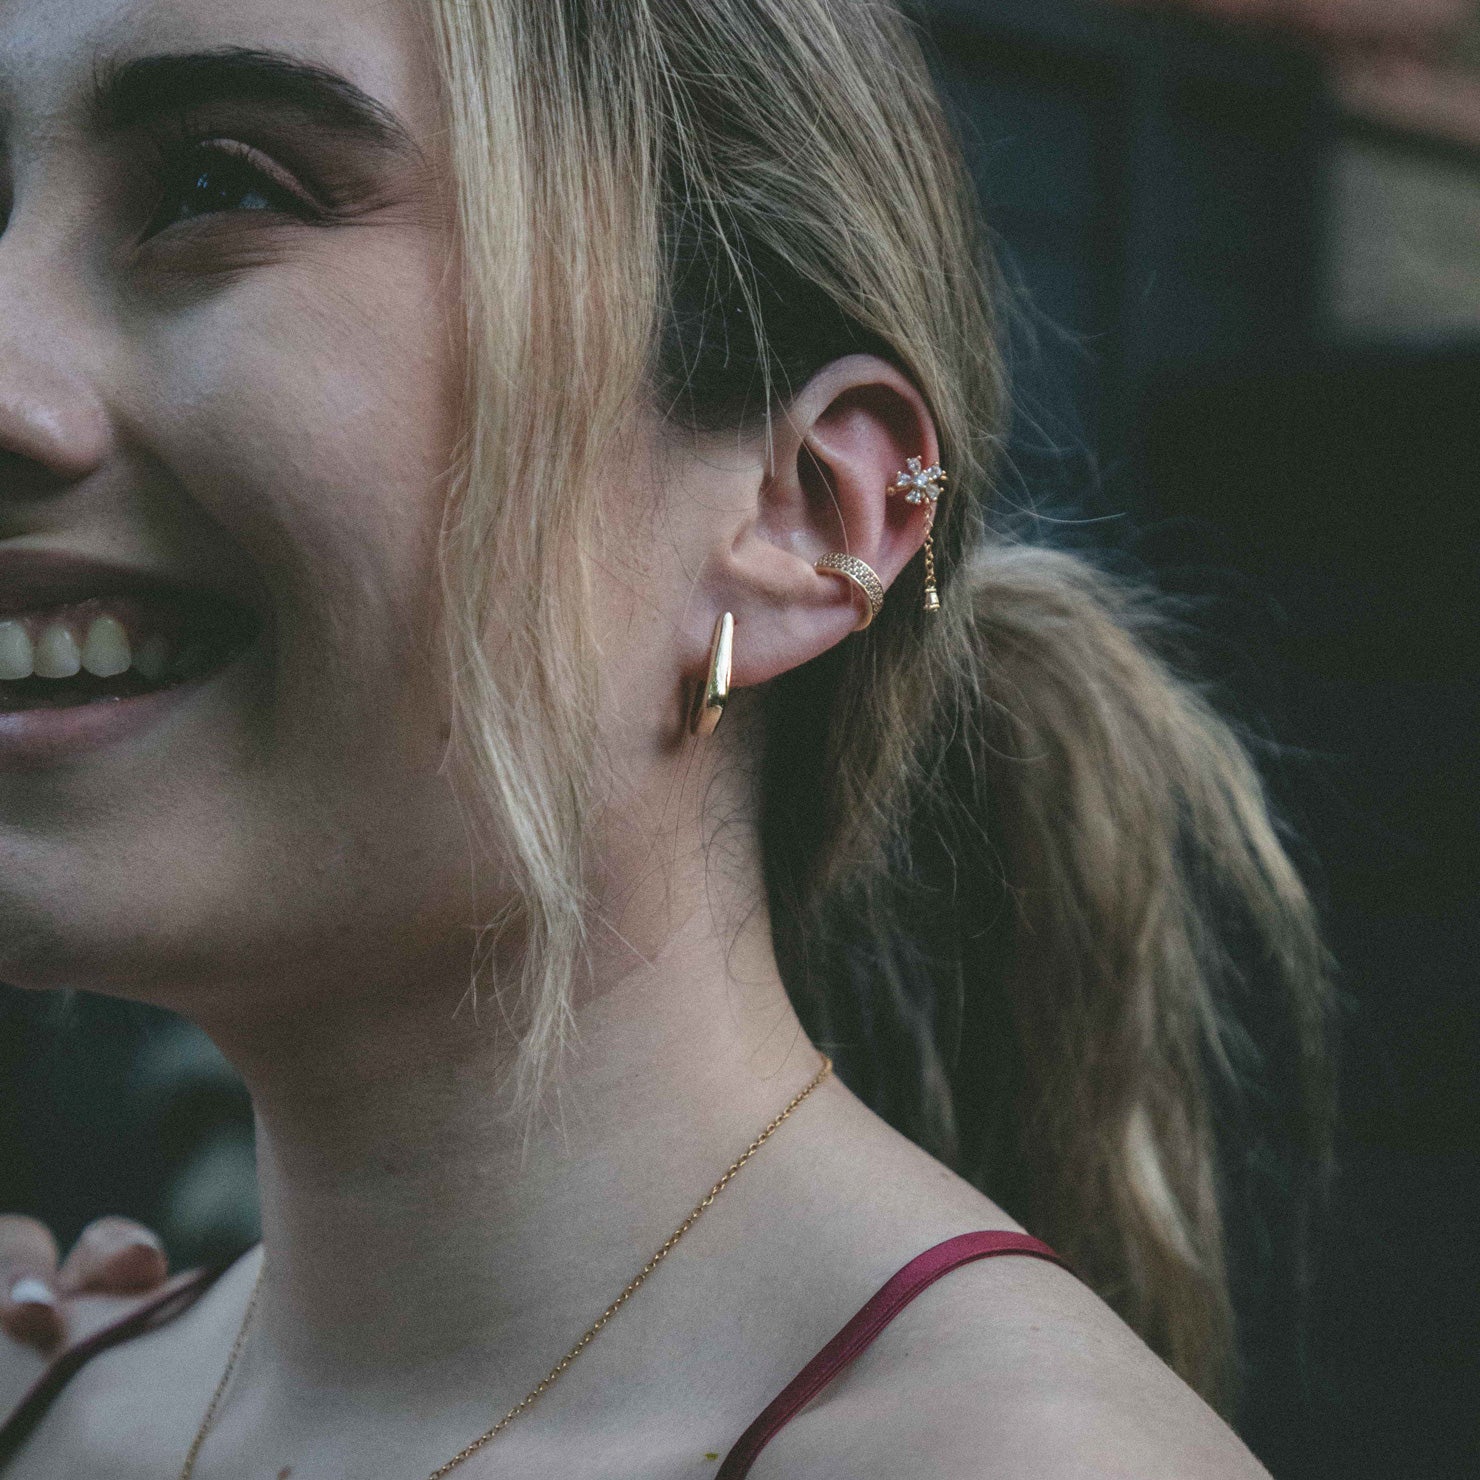 Model showcasing our 18K Gold Plated Ear Cuff with Cubic Zirconia. Water-resistant and non-tarnish for all-day wear.  Gentle squeeze for the perfect fit on any ear type.